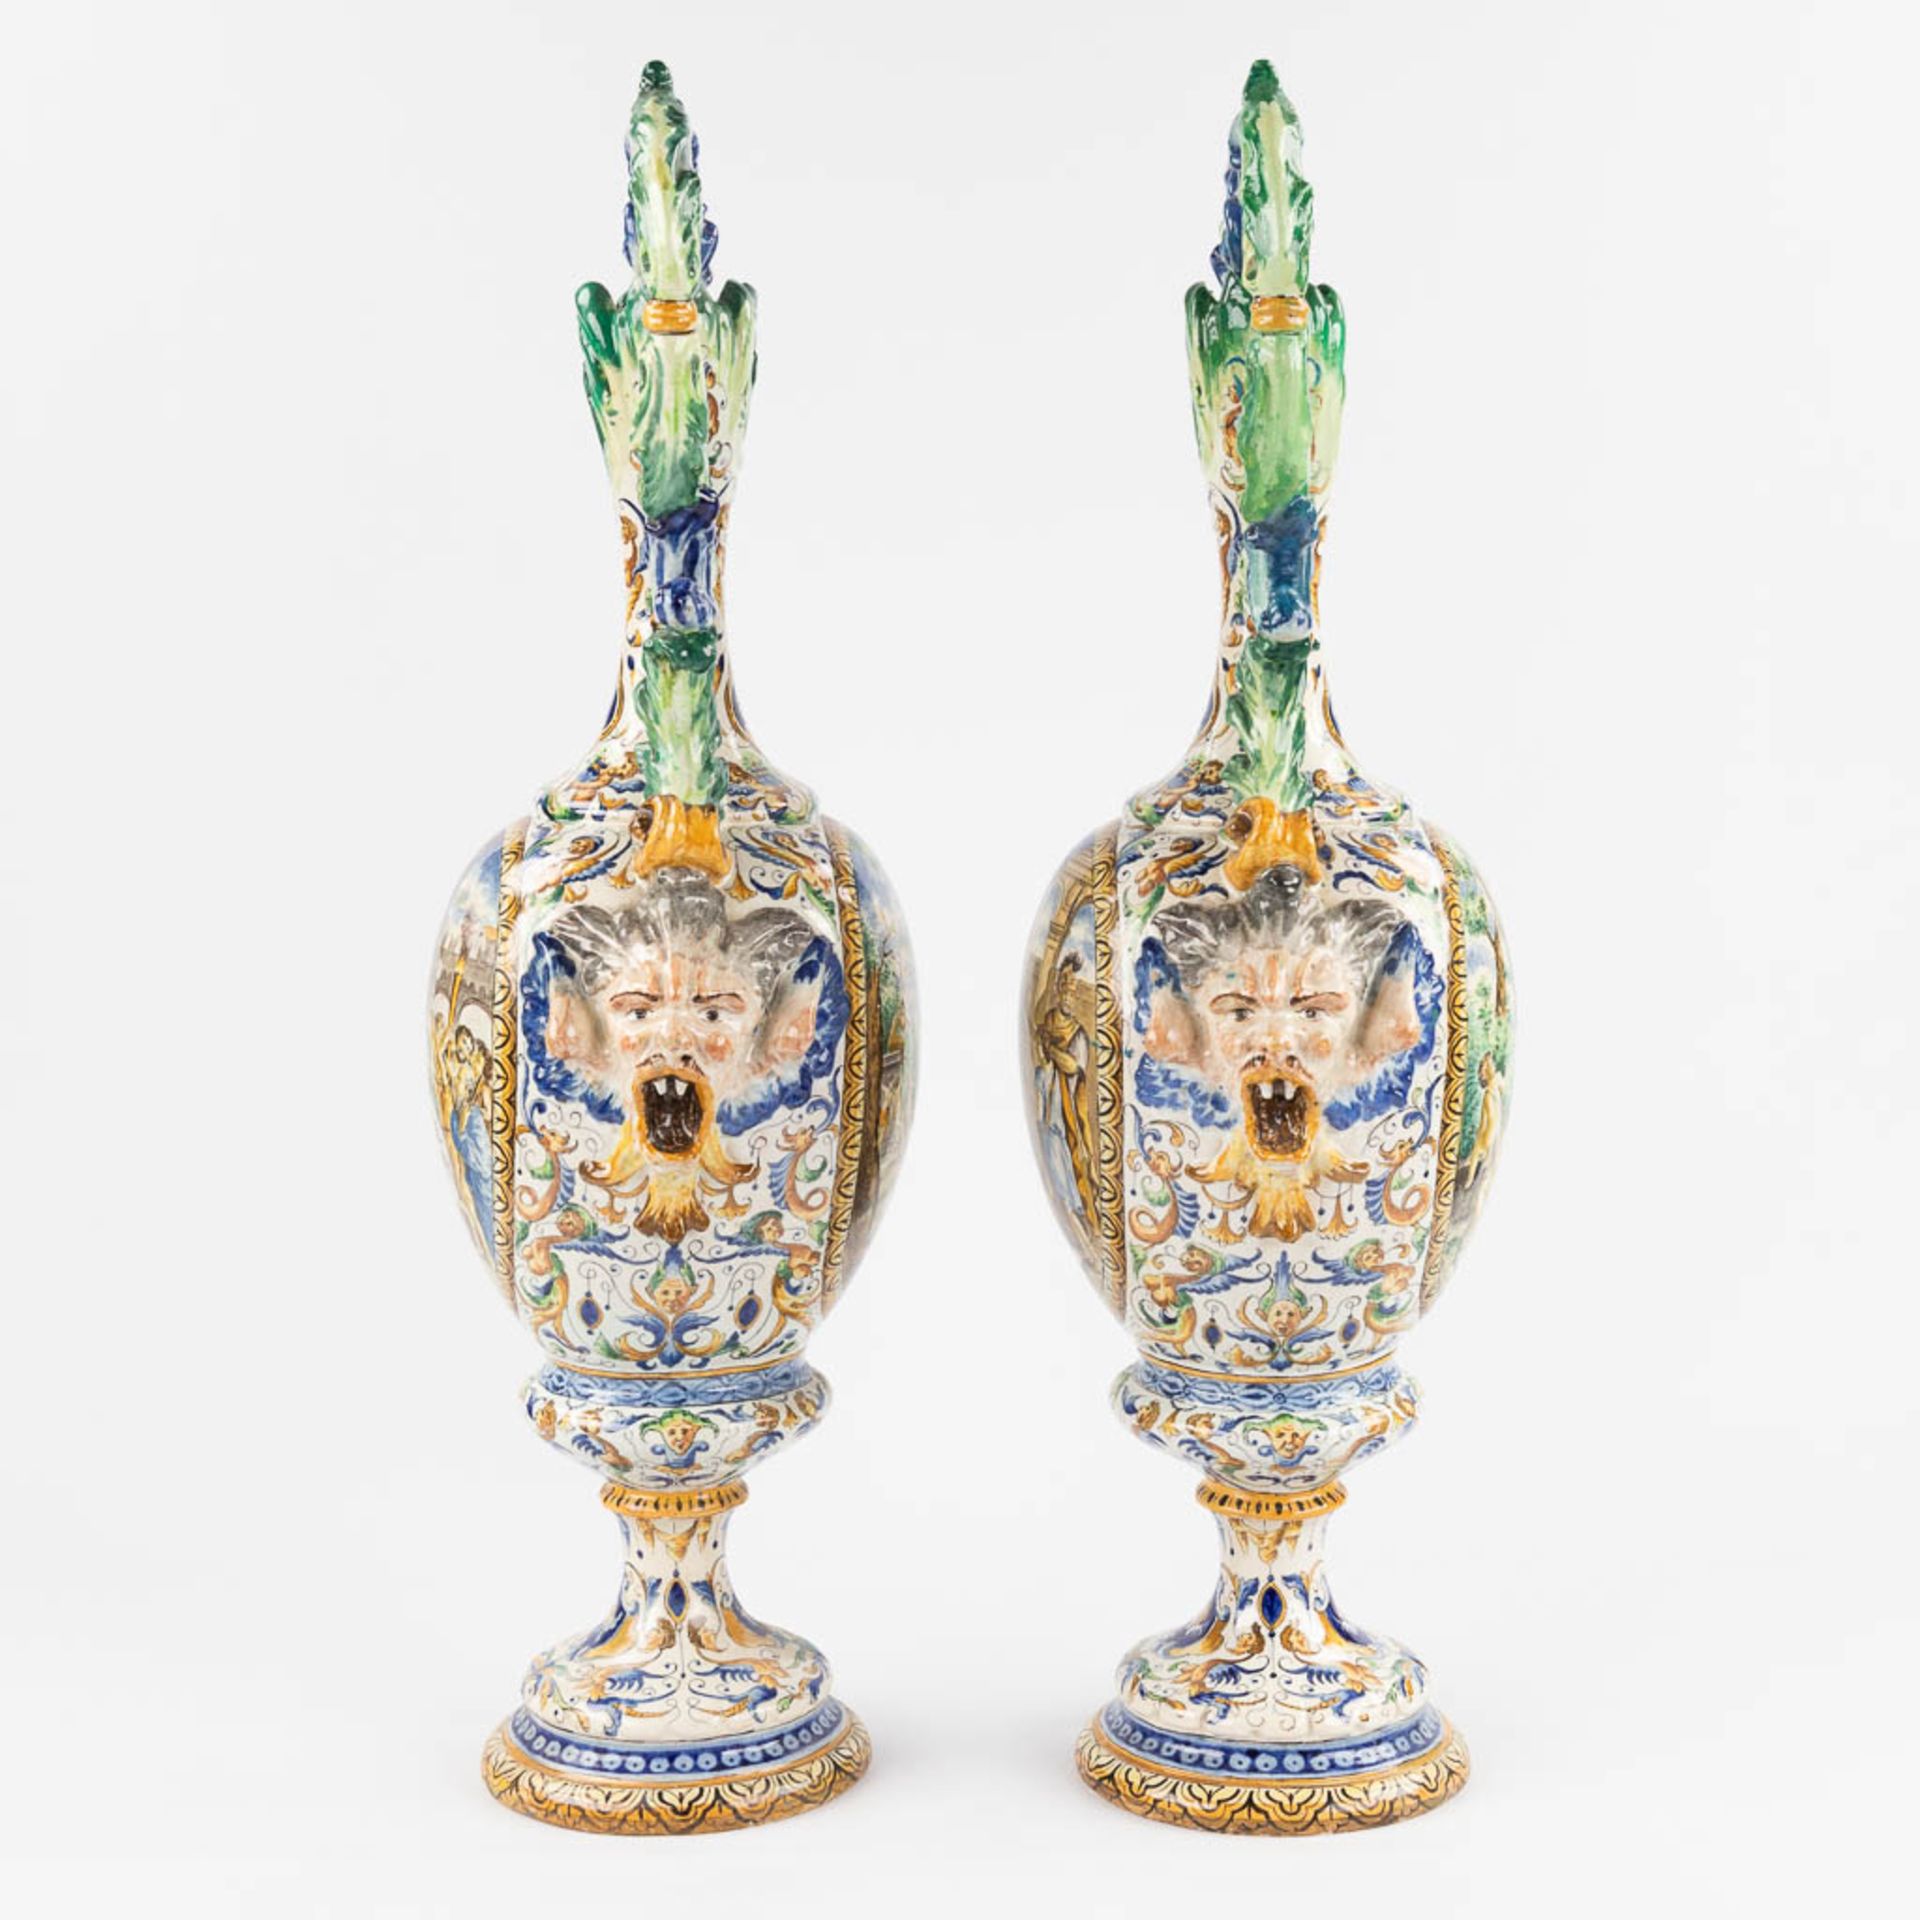 A pair of large vases, Italian Renaissance style, glazed faience. 20th C. (D:45 x W:45 x H:205 cm) - Image 6 of 31